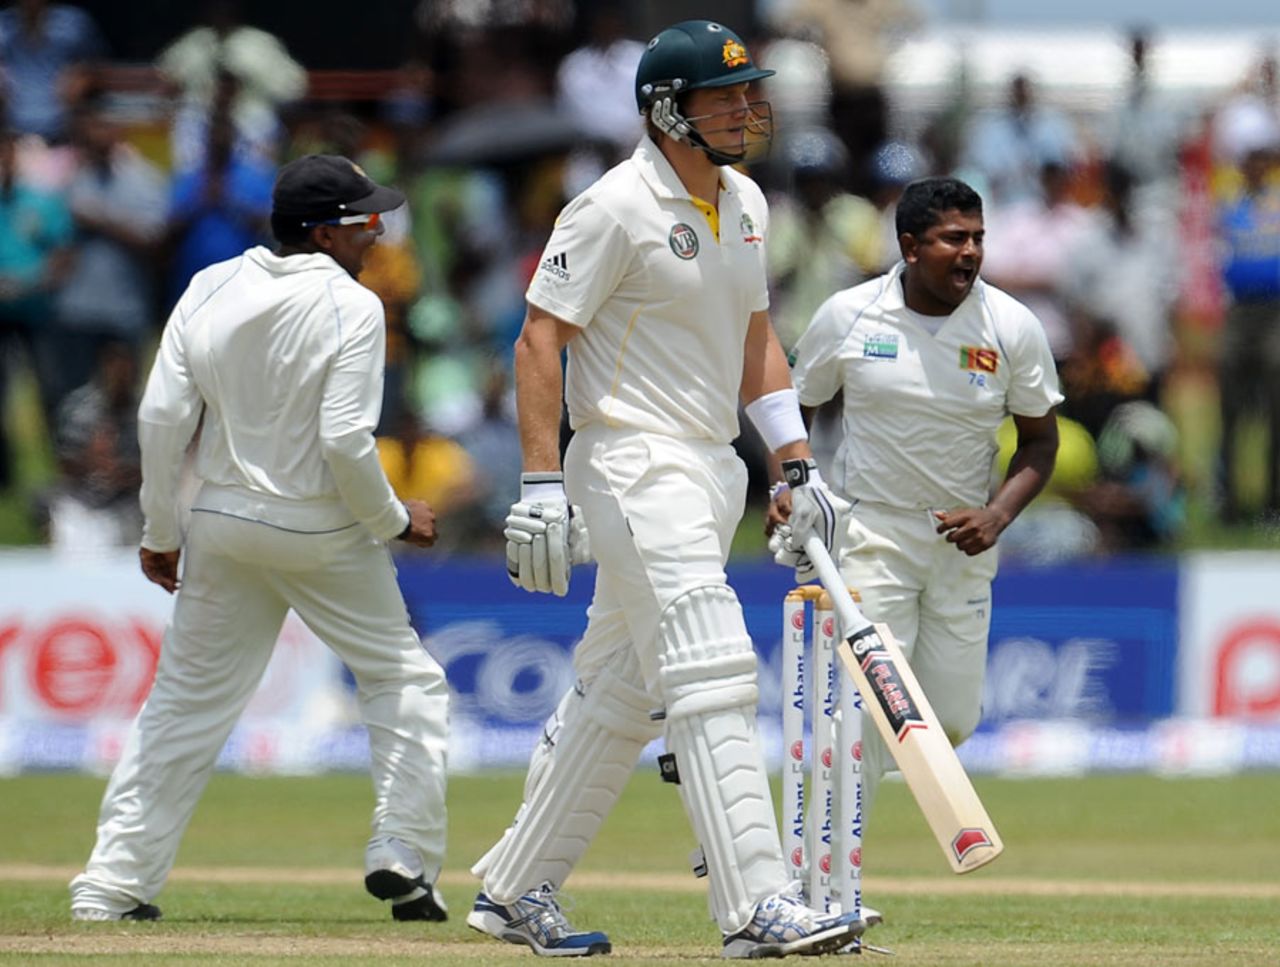 Rangana Herath removed Shane Watson with his first delivery, Sri Lanka v Australia, 1st Test, Galle, 1st day, August 31, 2011